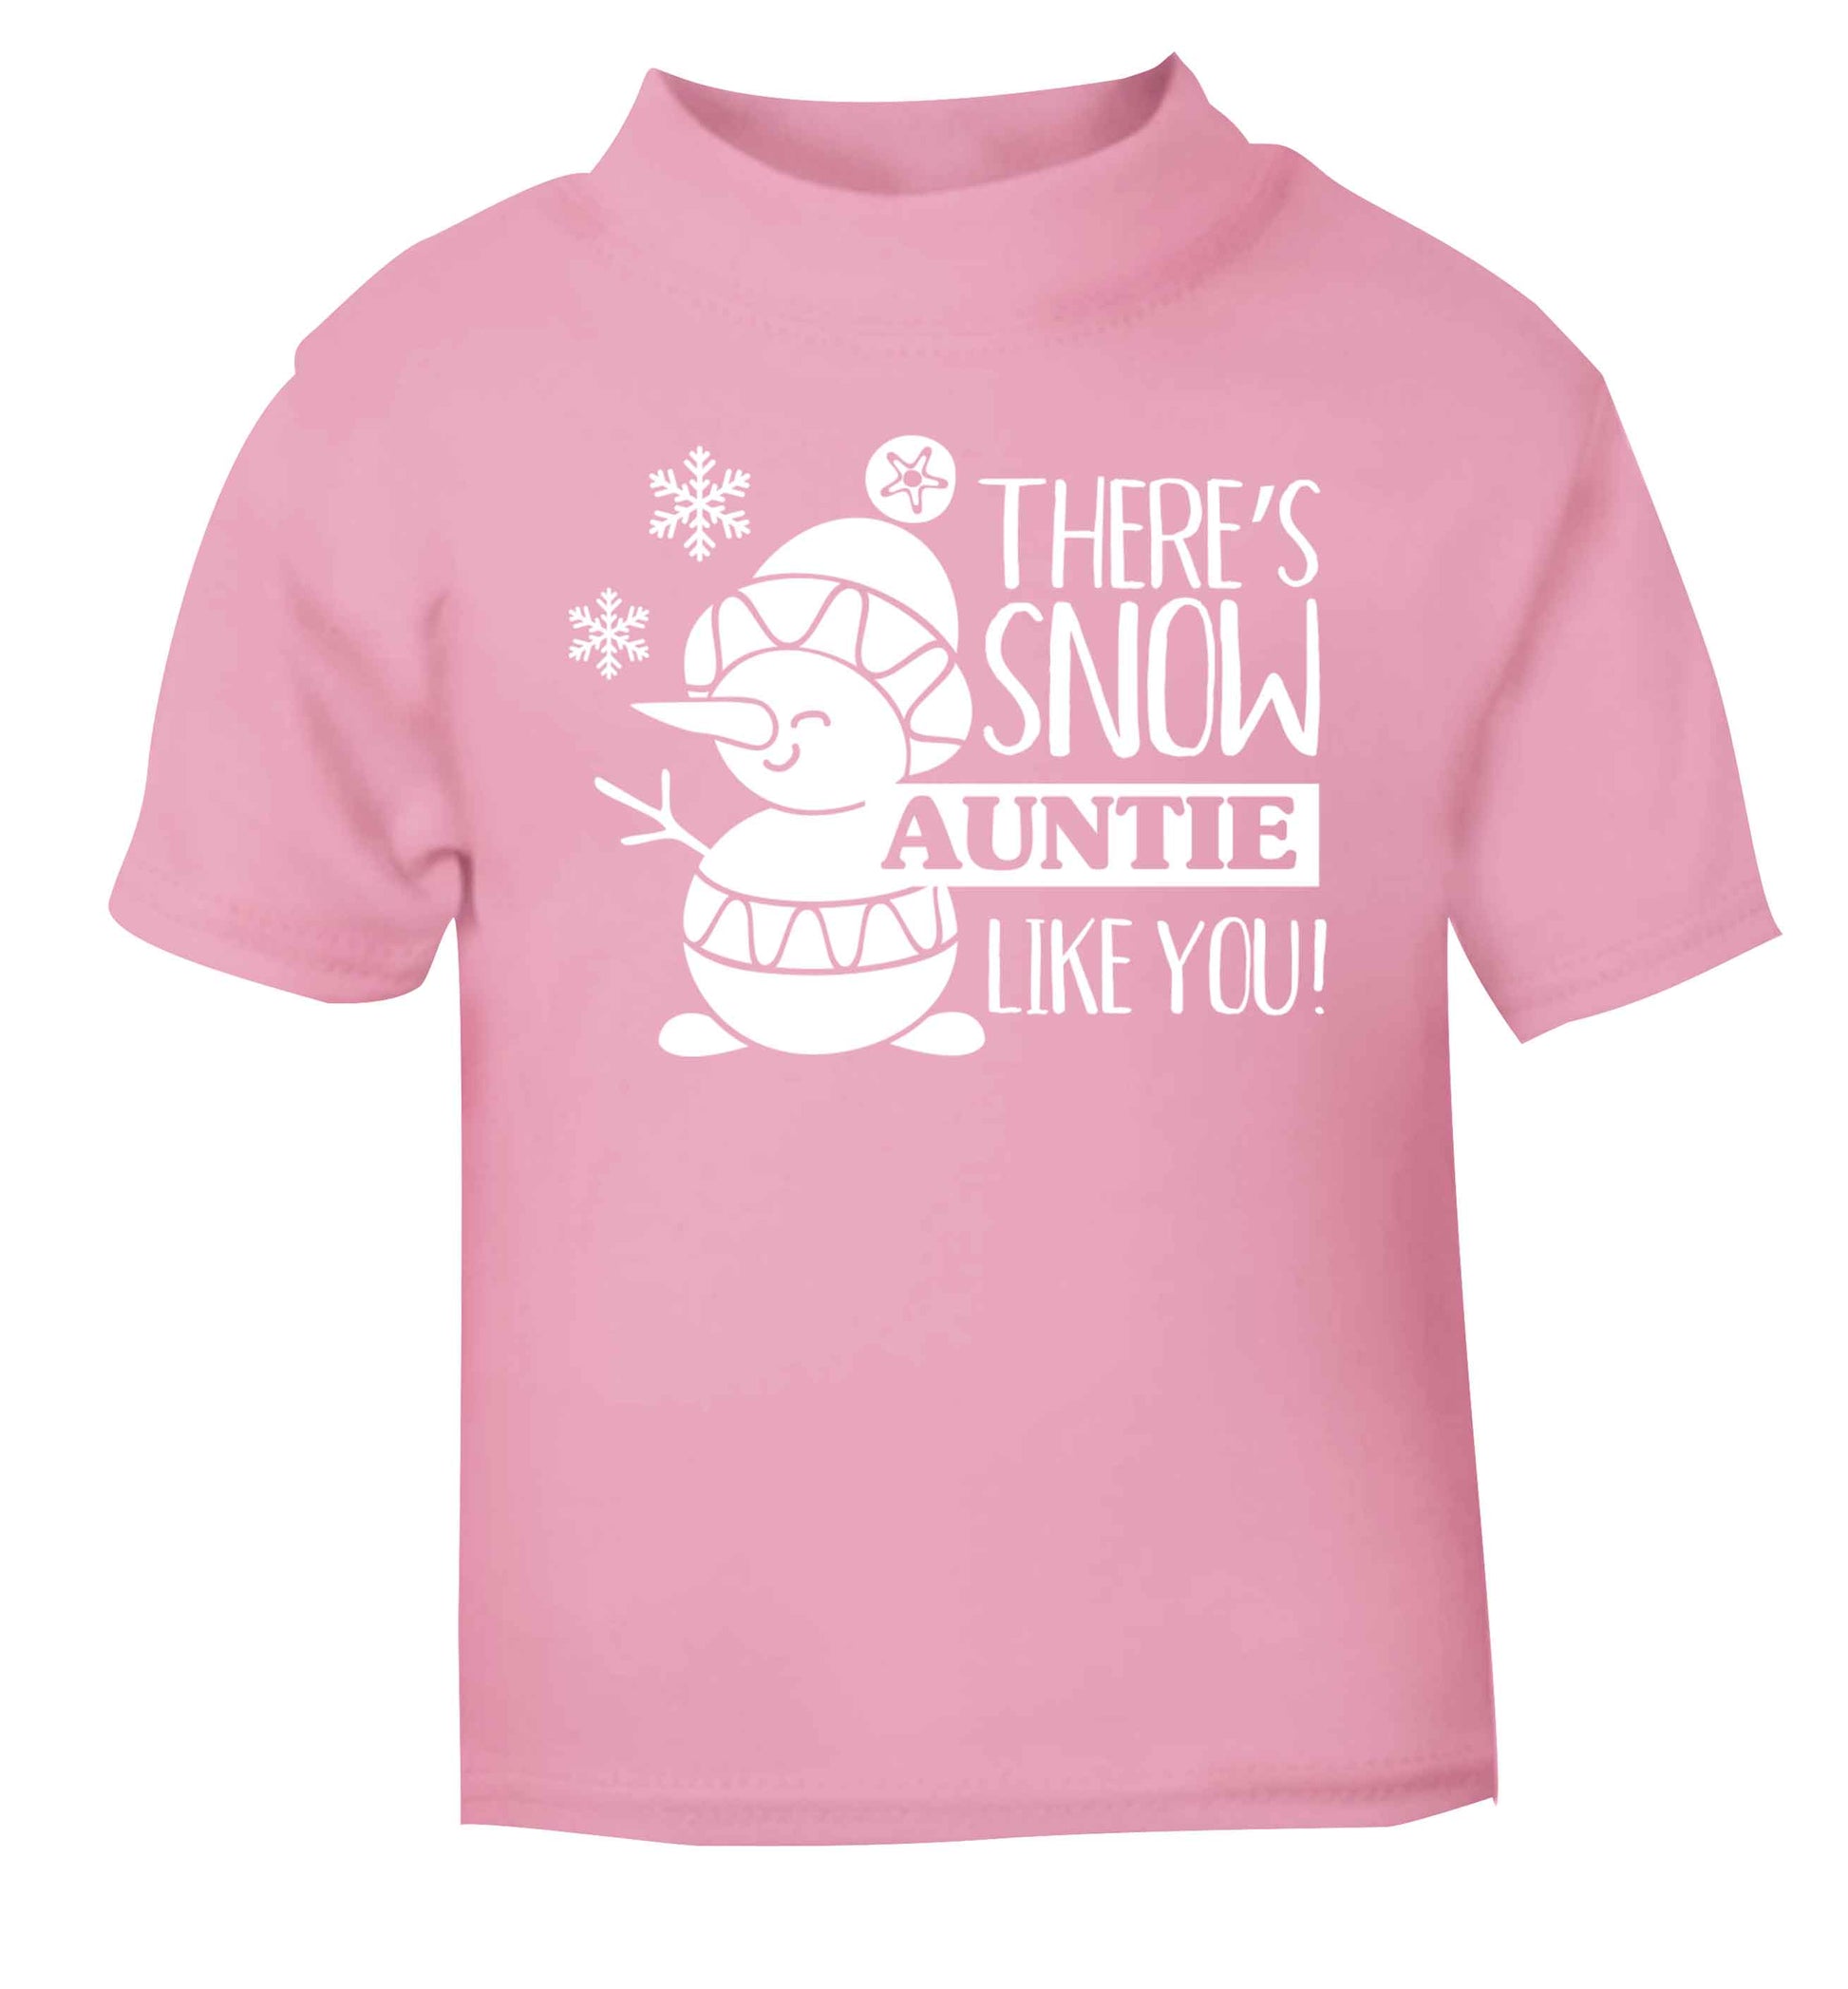 There's snow auntie like you light pink baby toddler Tshirt 2 Years